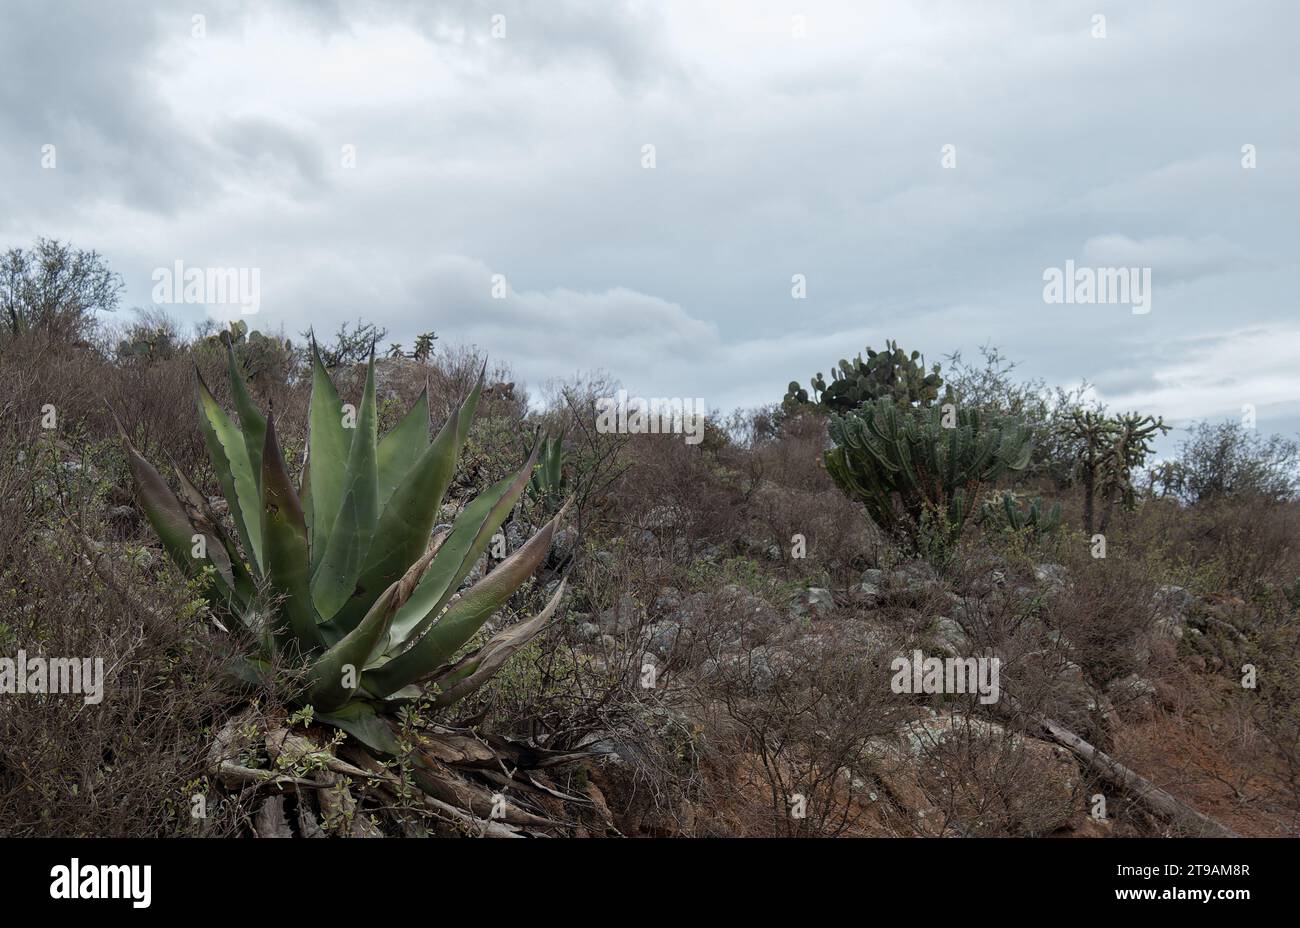 A Mexican landscape with Agave salmiana, Myrtillocactus geometrizans Cactaceae and shrubs Stock Photo